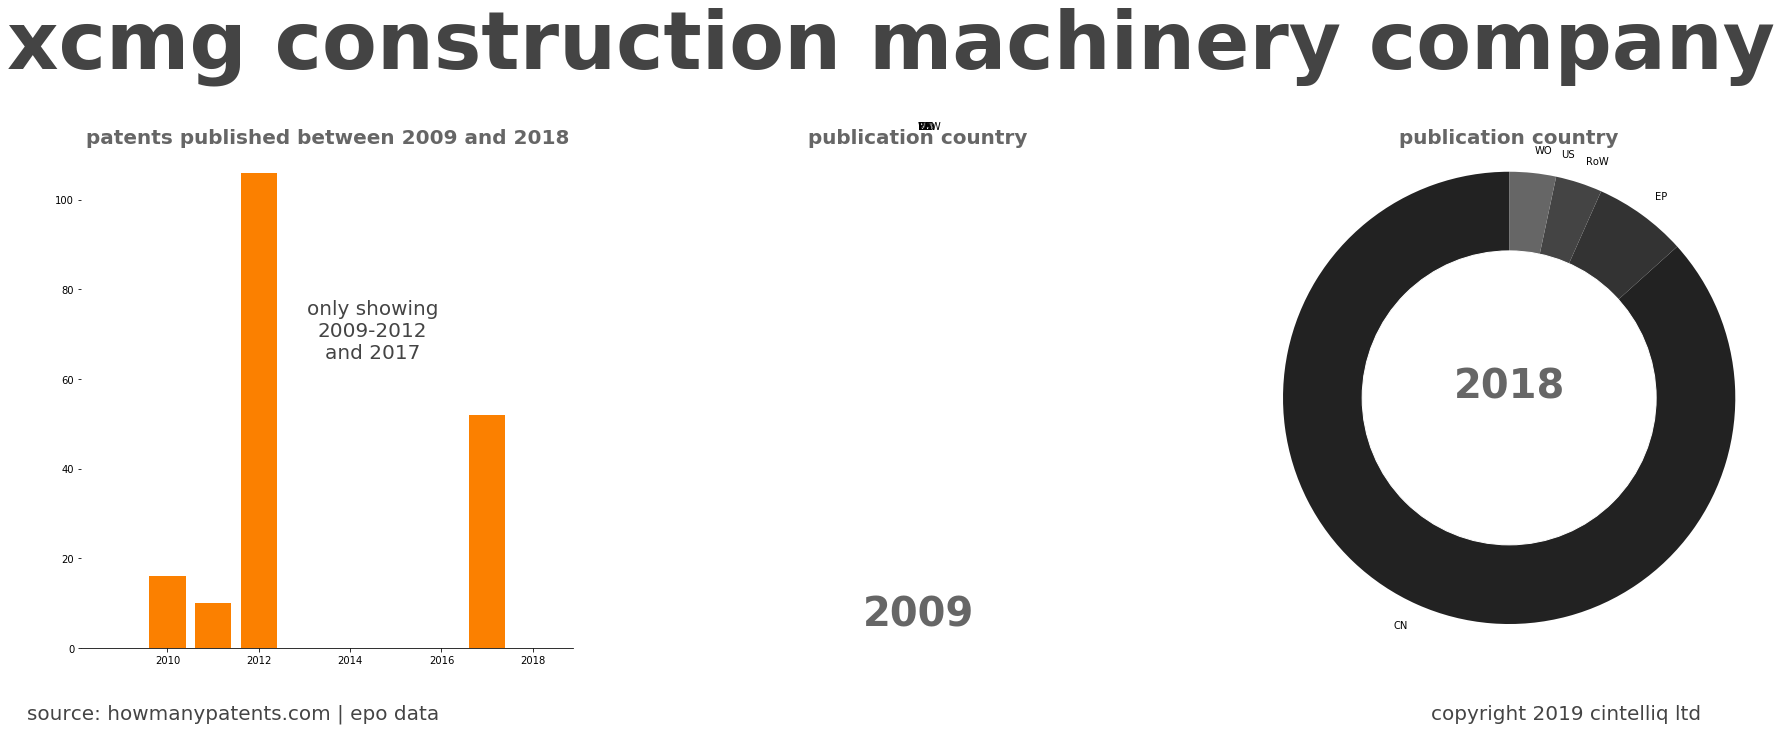 summary of patents for Xcmg Construction Machinery Company